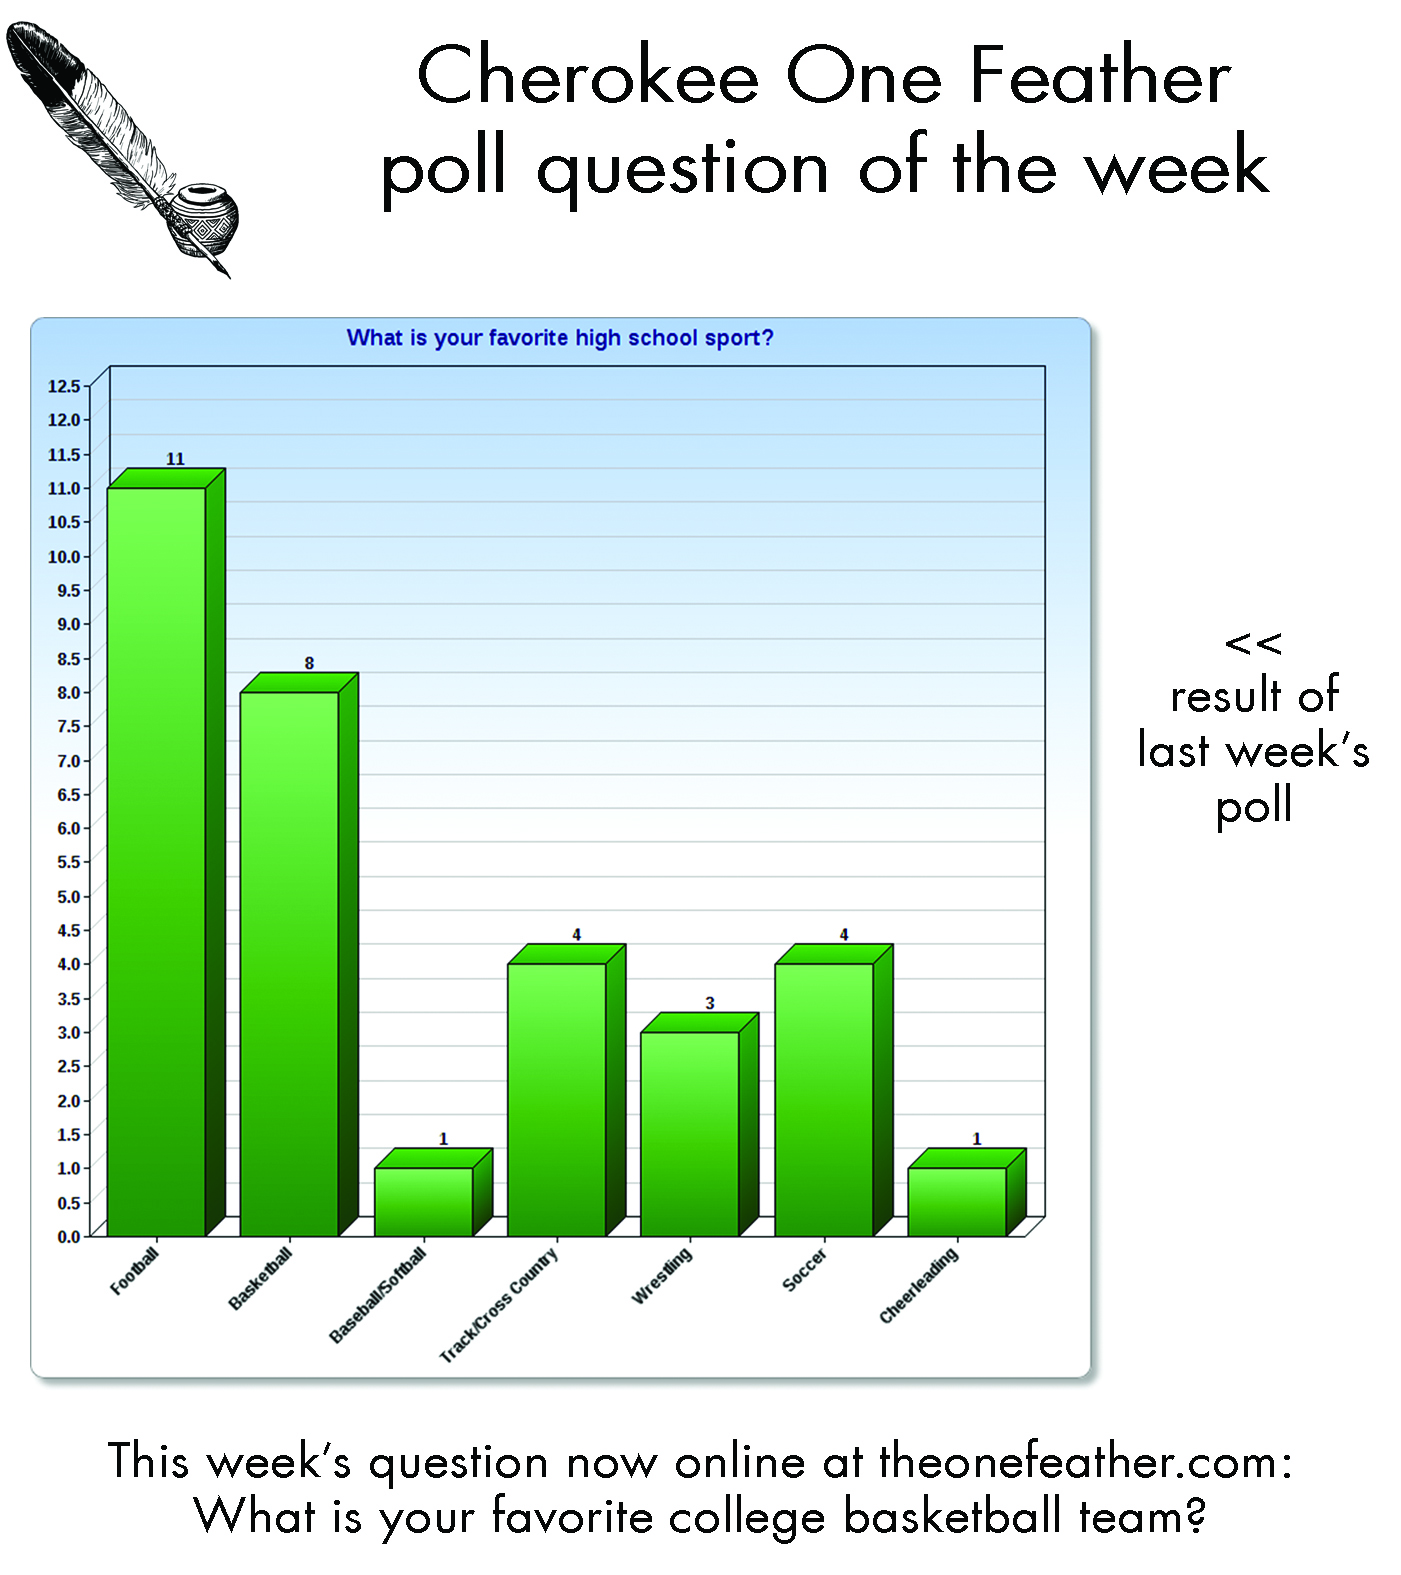 One Feather poll